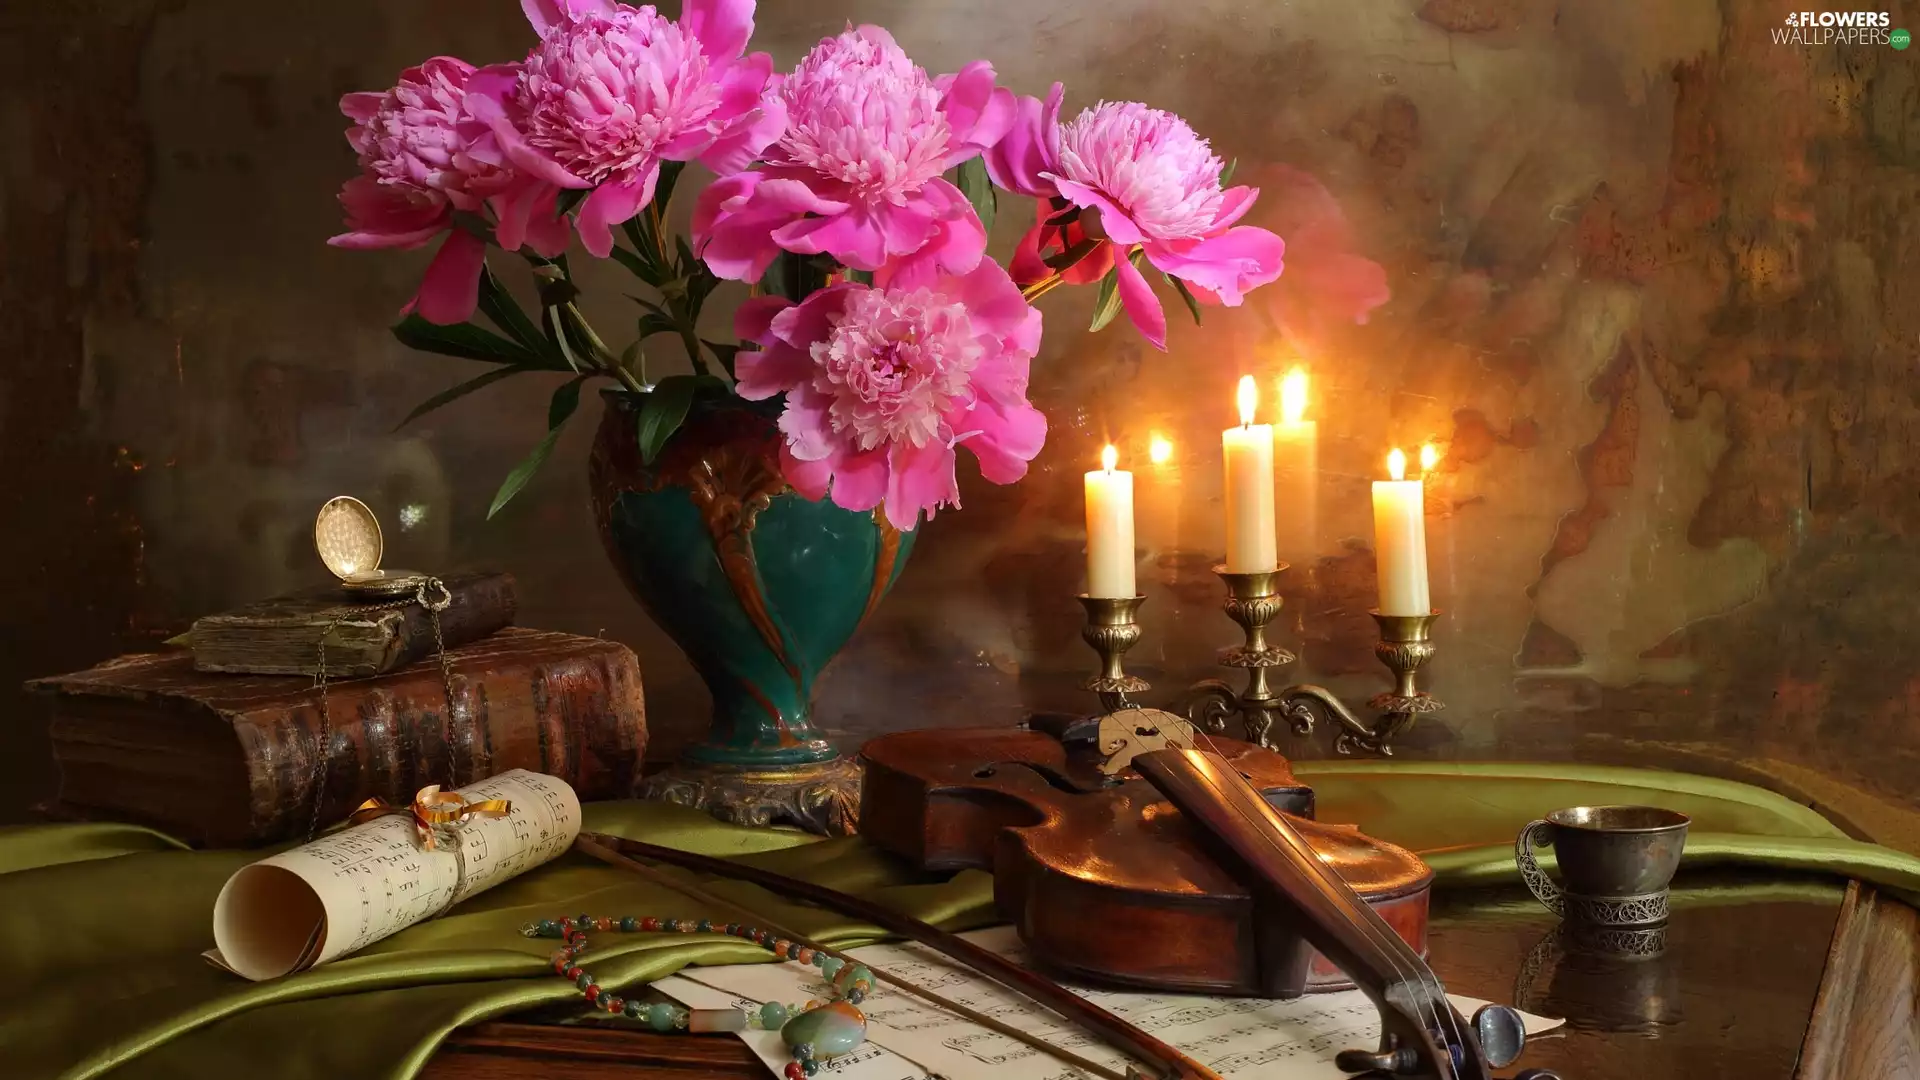 Candles, composition, Tunes, Books, violin, Peonies